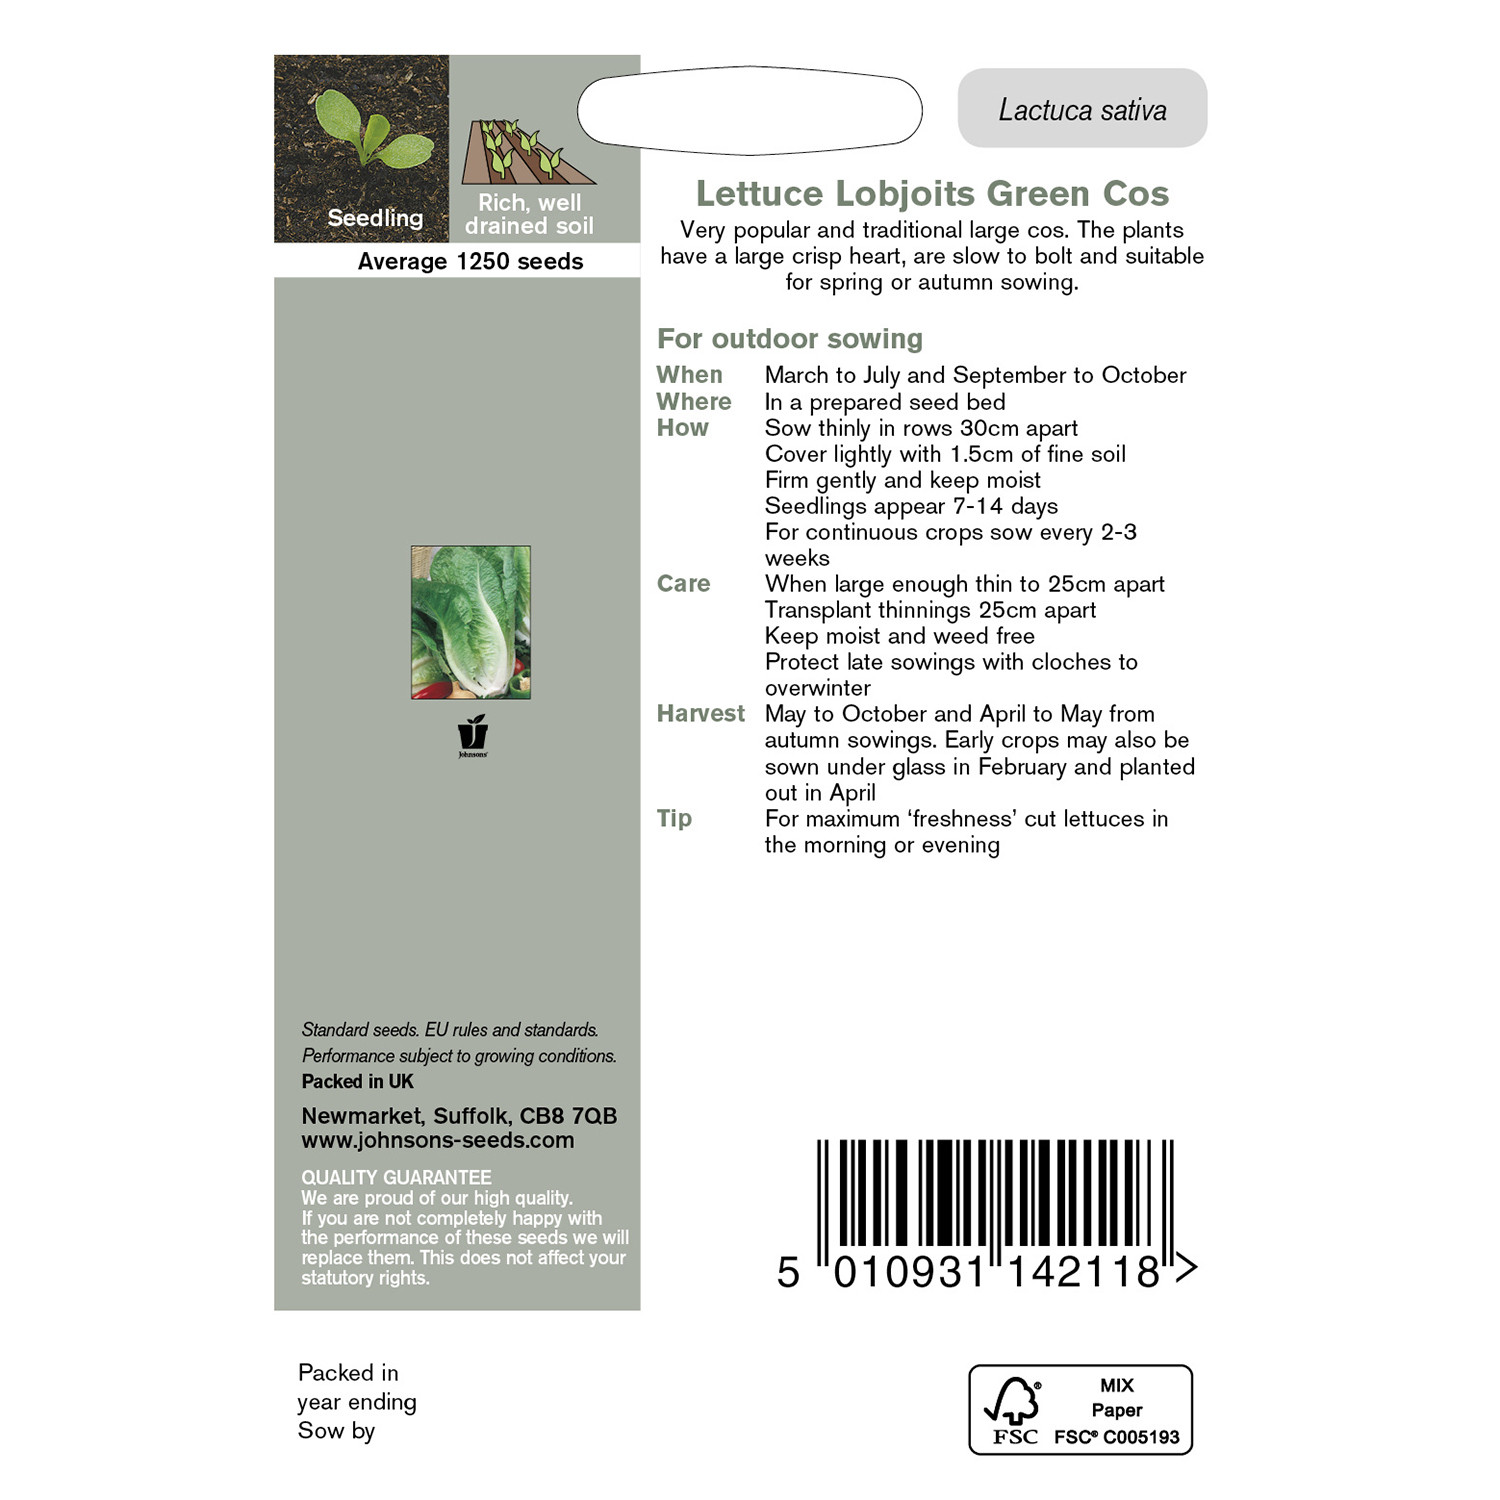 Pack of Lettuce Lobjoits Green Cos Seeds Image 2